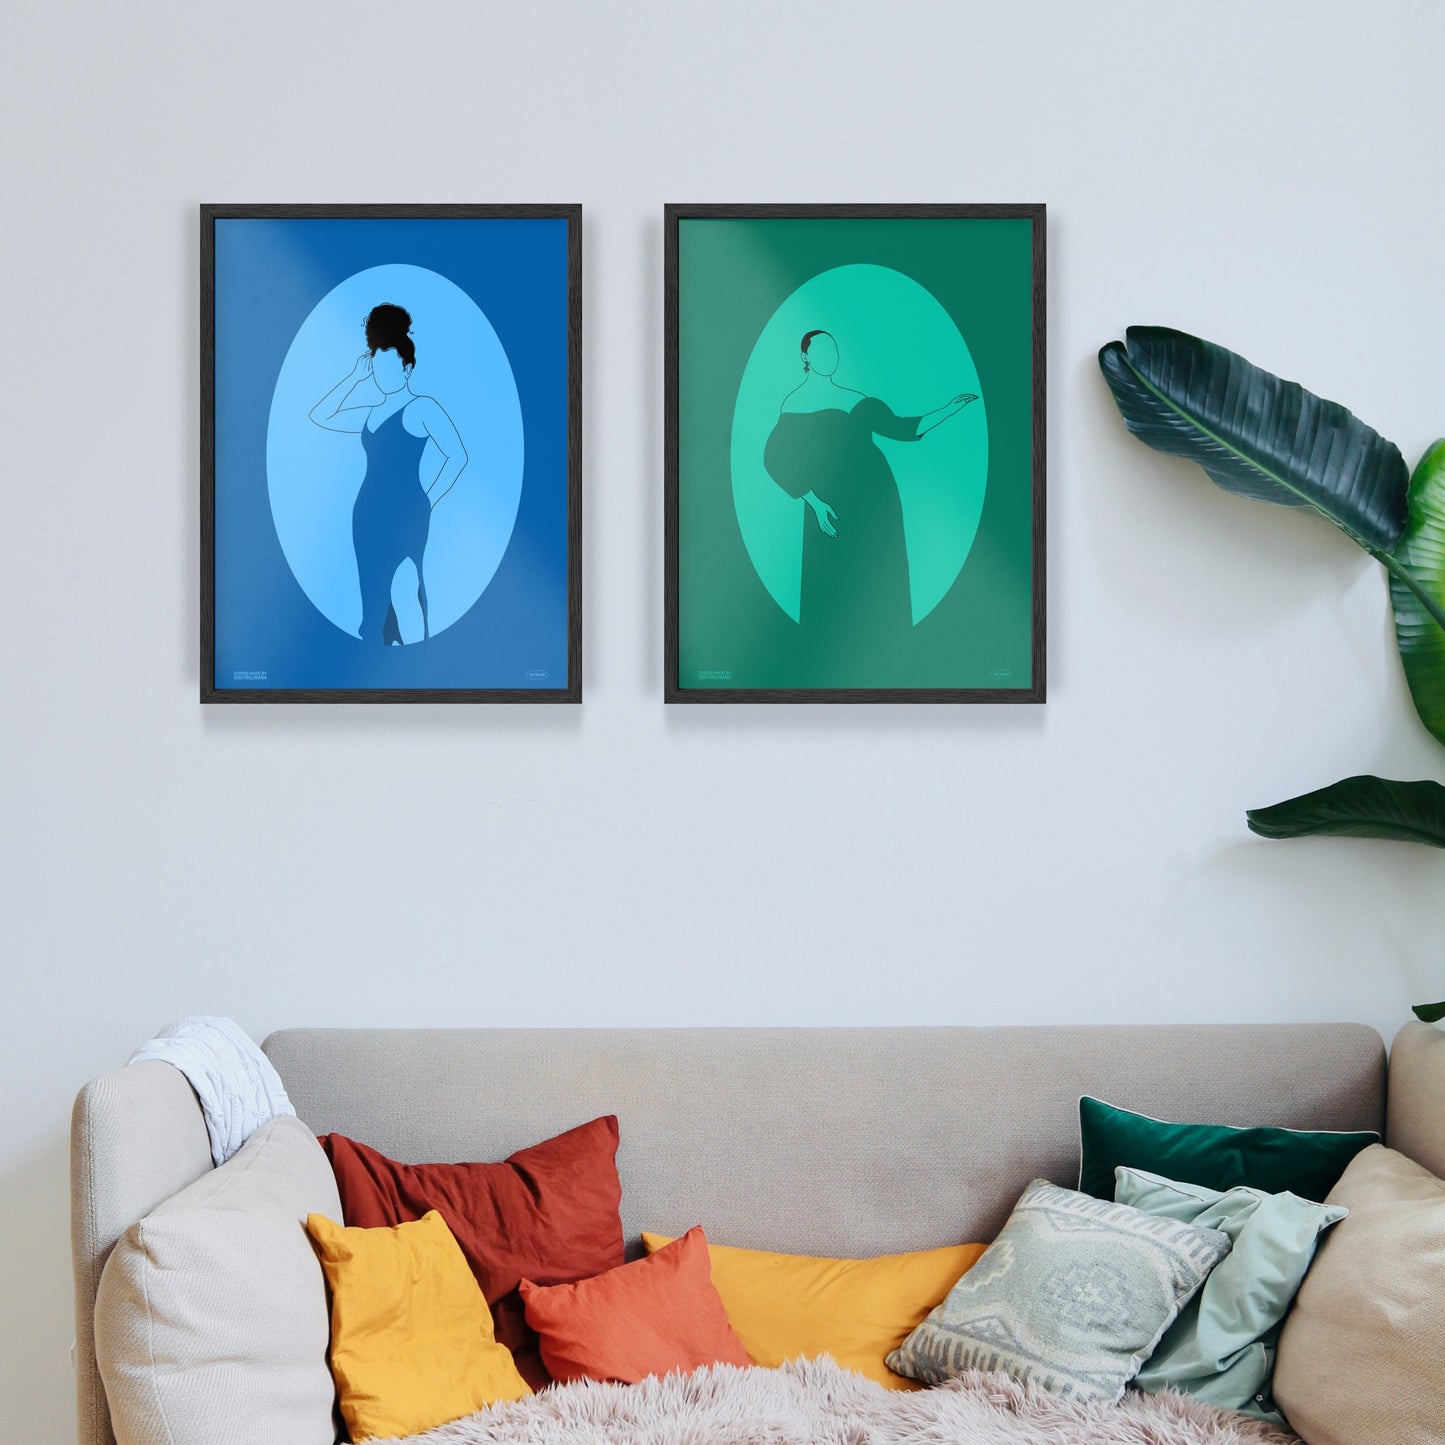 A series of four vibrant monochromatic illustrations of black women figures in the hues orange, blue, and teal. The illustration features a silhouette oval with a women’s figure inside. Light and dark colors create an optical illusion with positive and negative space.